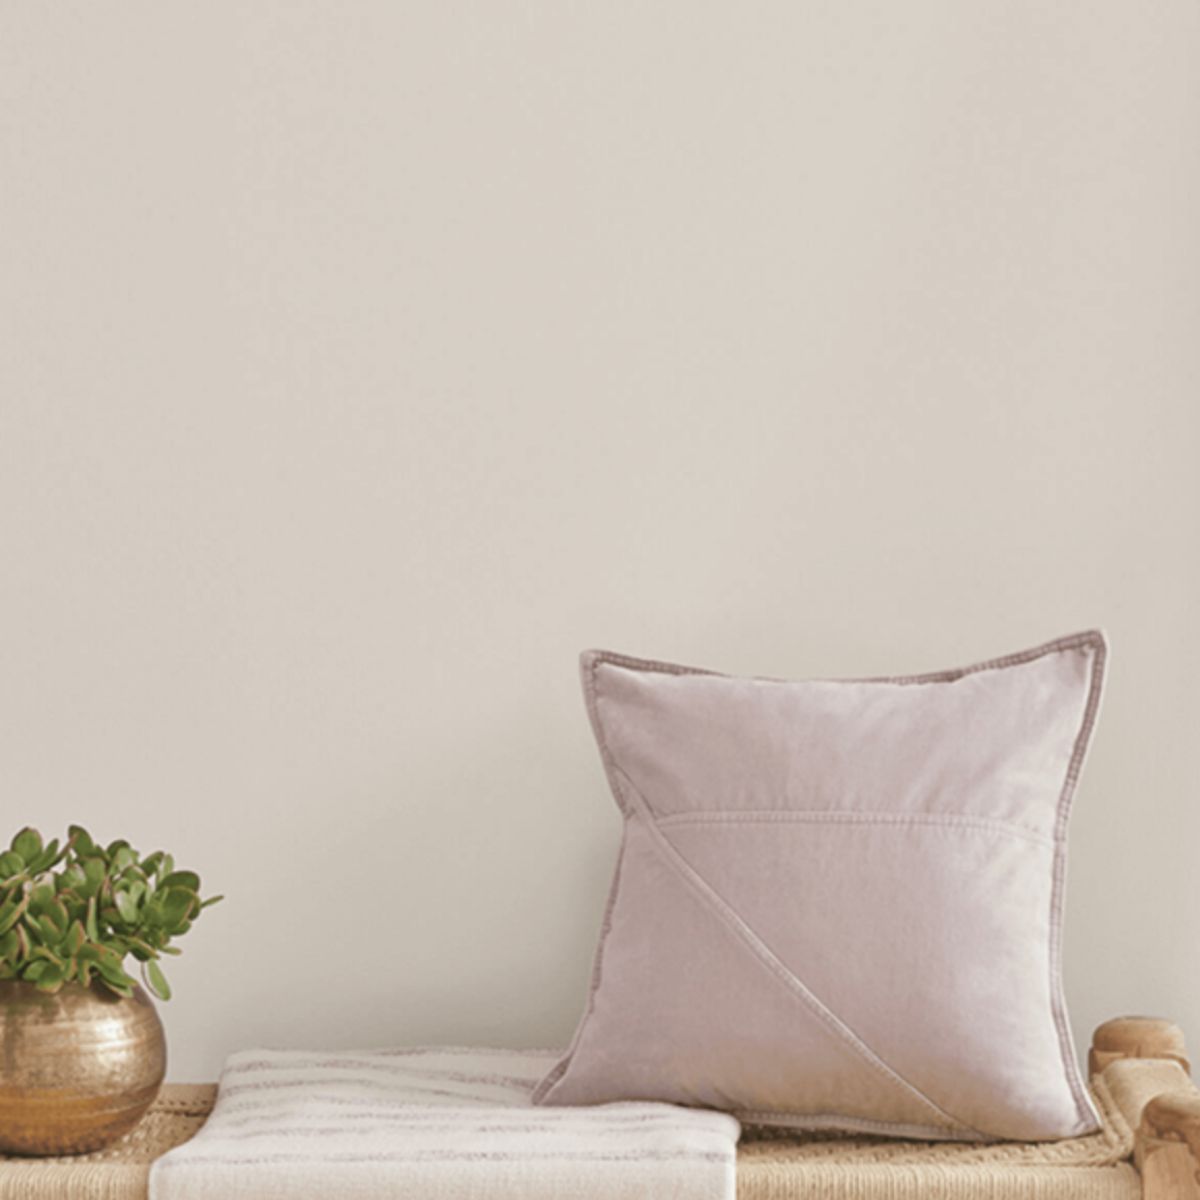 Popular gray painted walls above a bench with a pillow and faux plant on it.